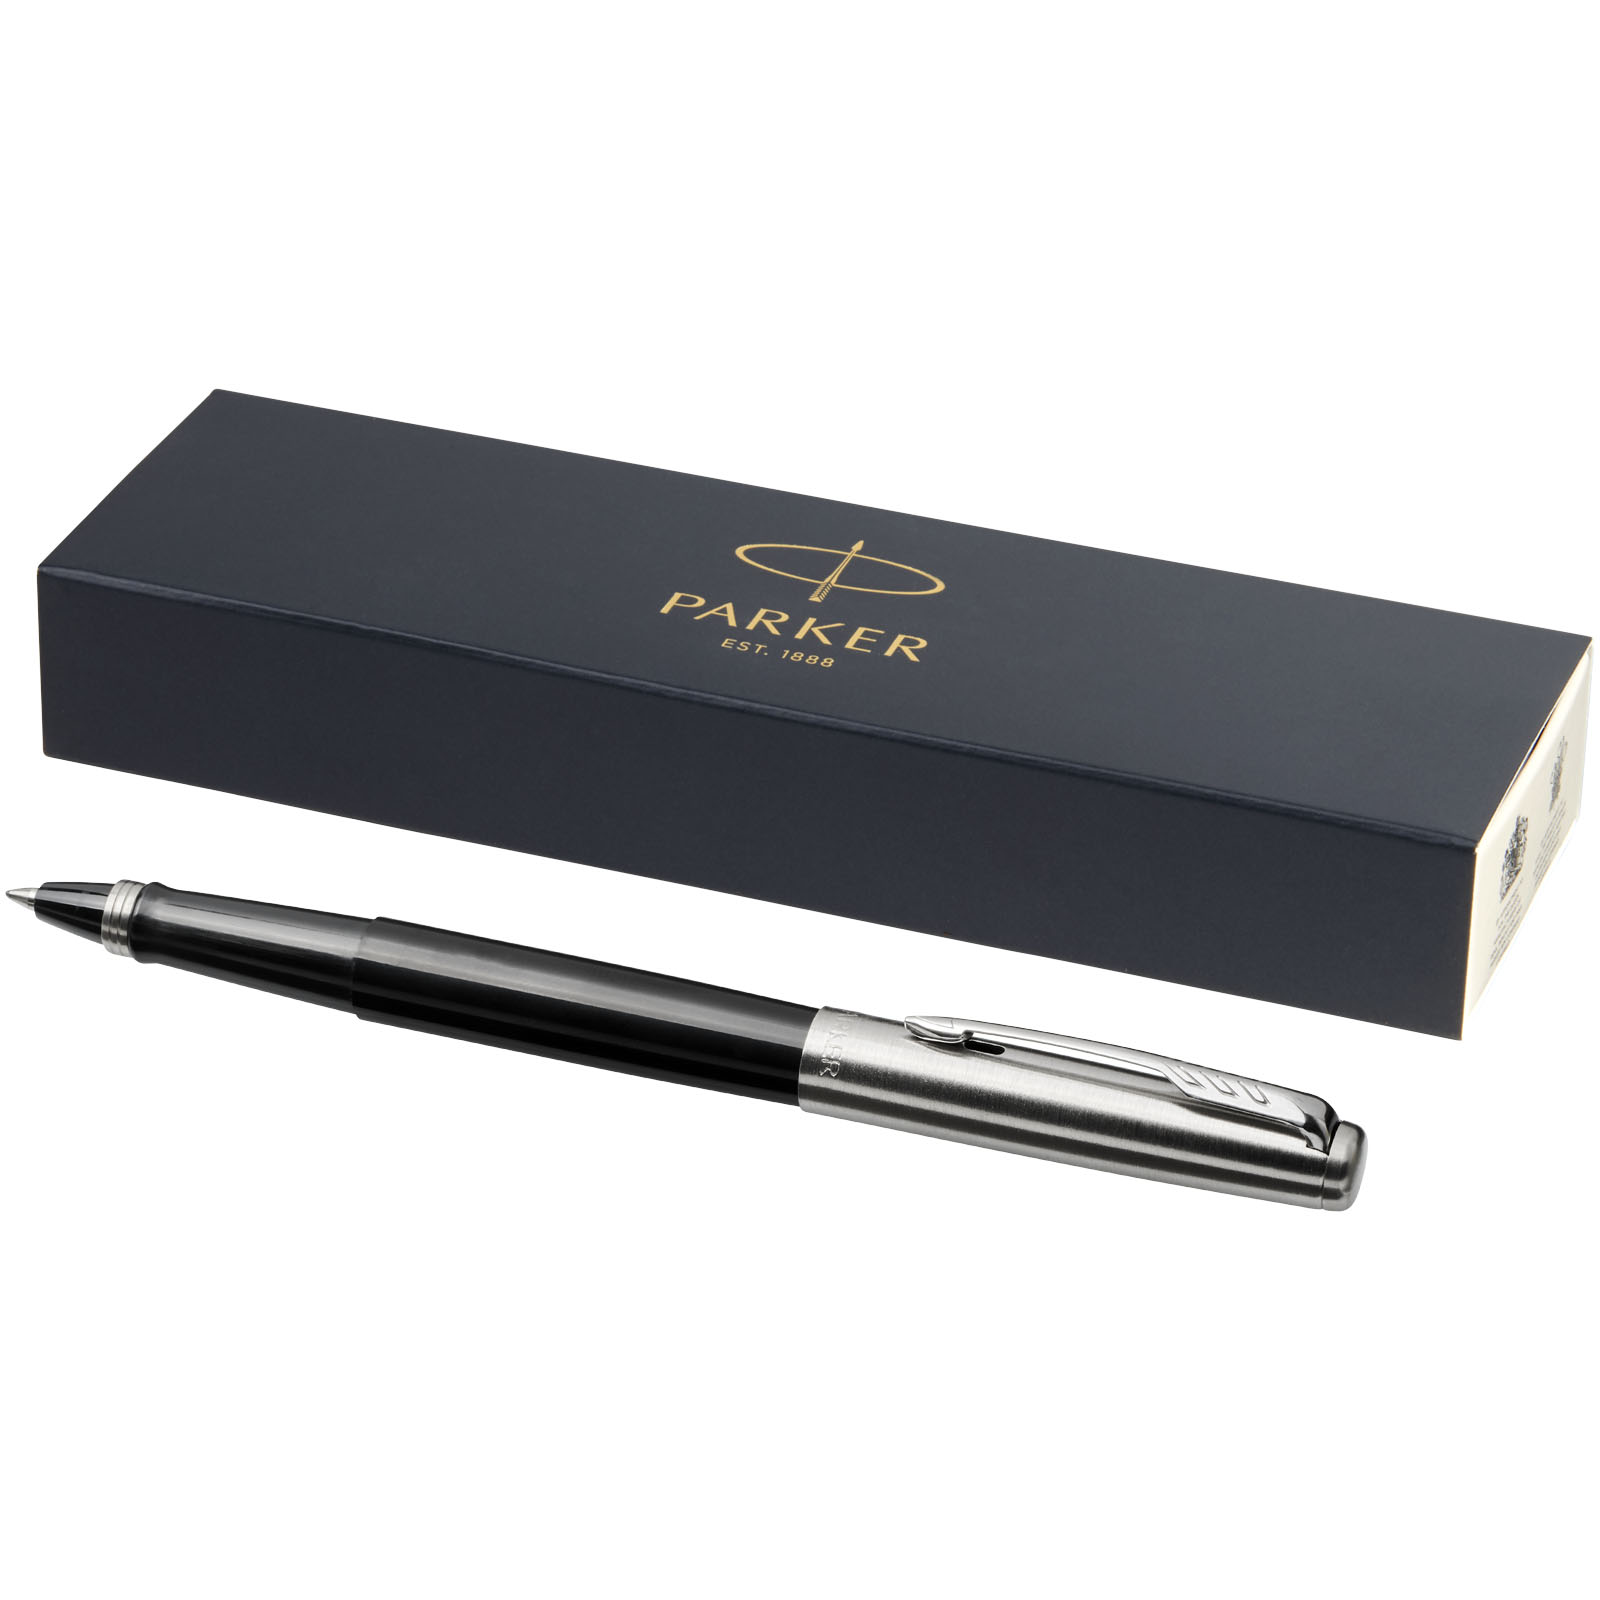 Rollerball Pens - Parker Jotter plastic with stainless steel rollerball pen